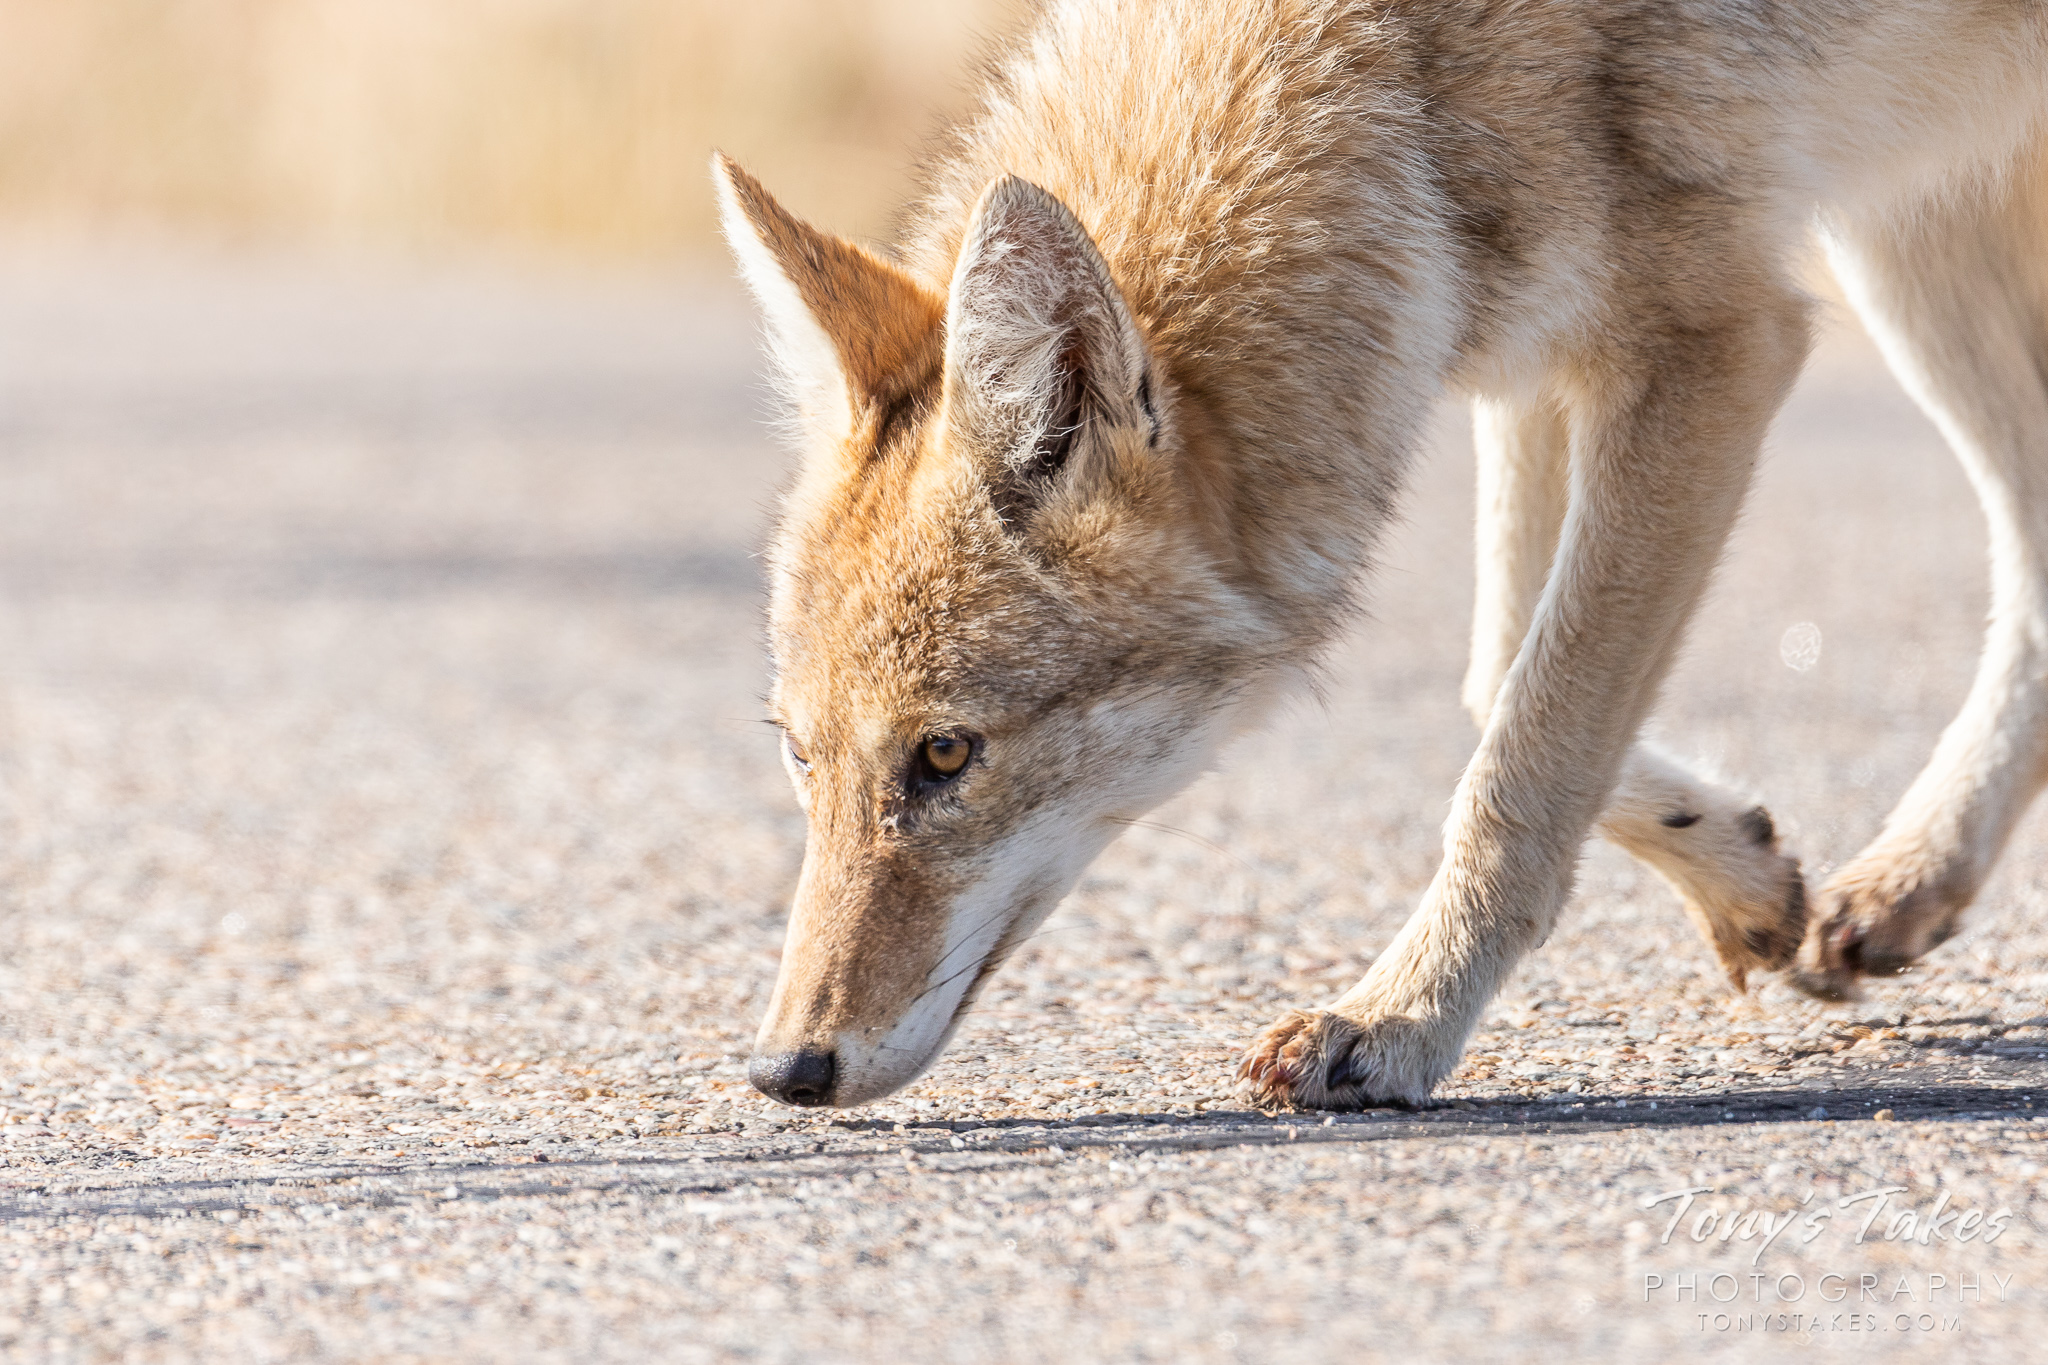 A young Coyote keeps its nose to the ground sniffing for a meal. (© Tony’s Takes)